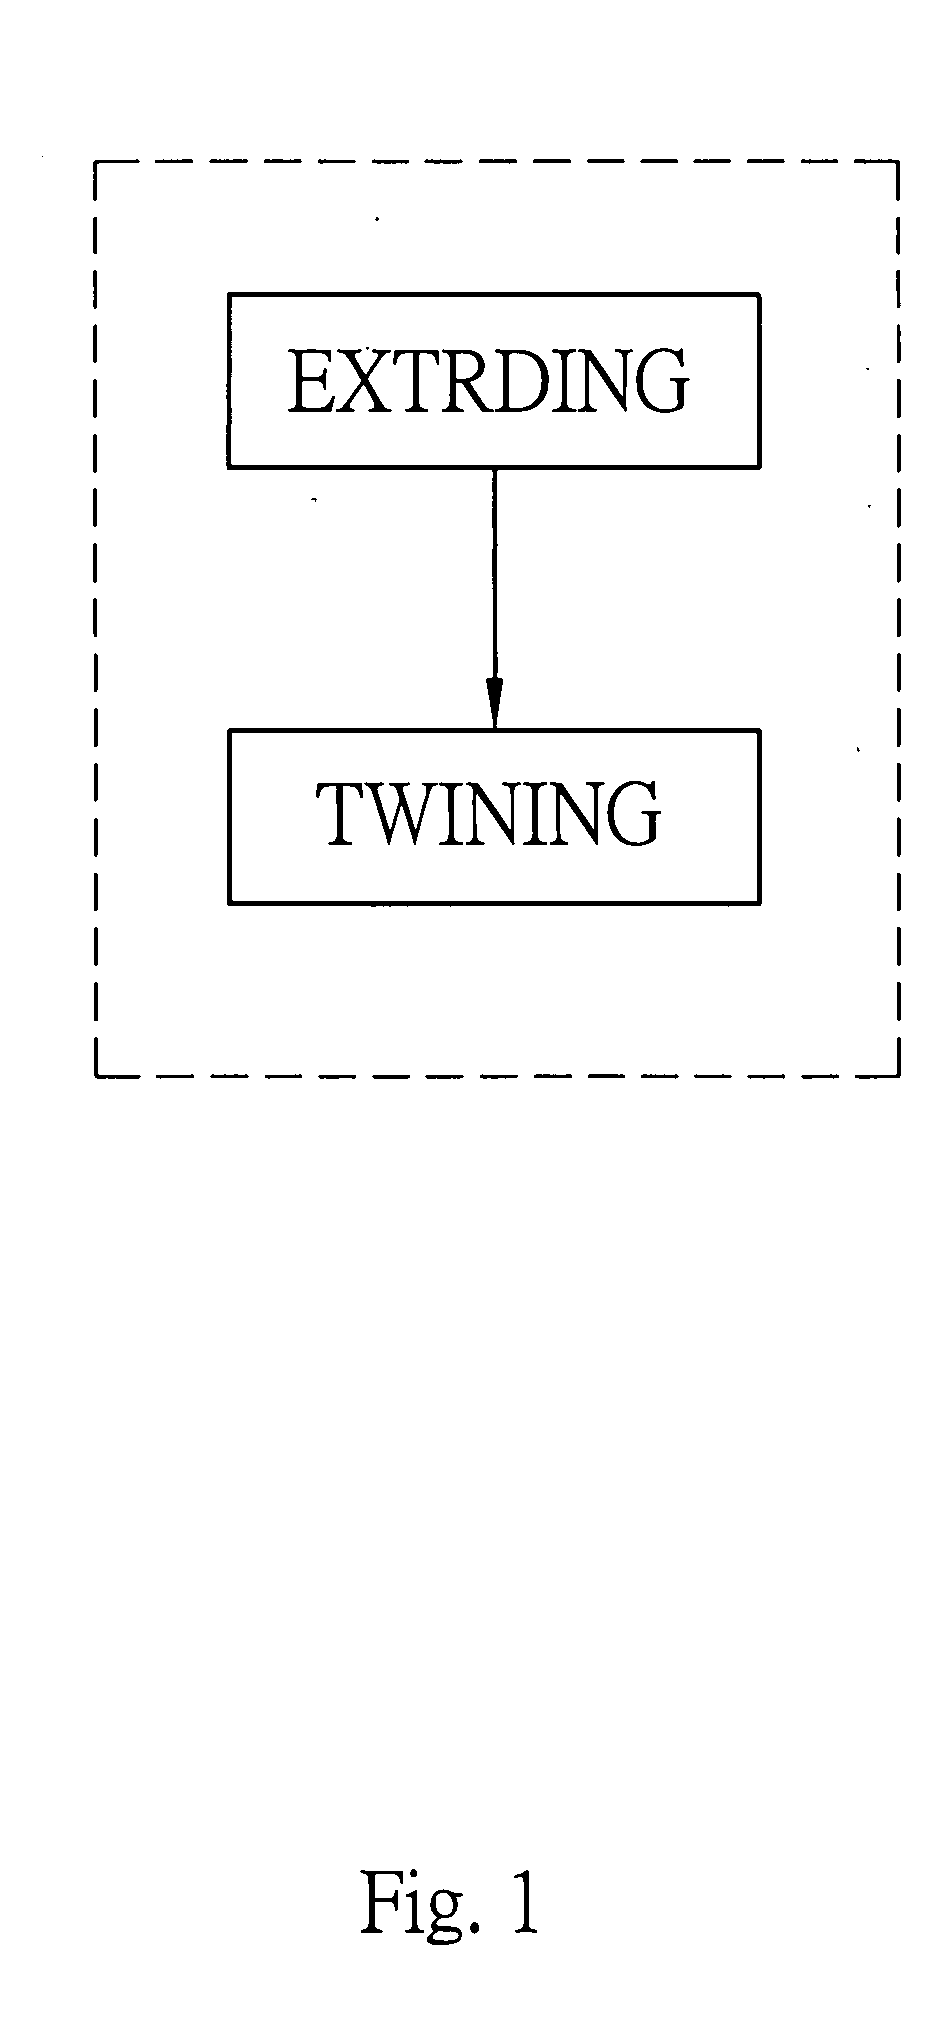 Strings of sport rackets and method for making the same